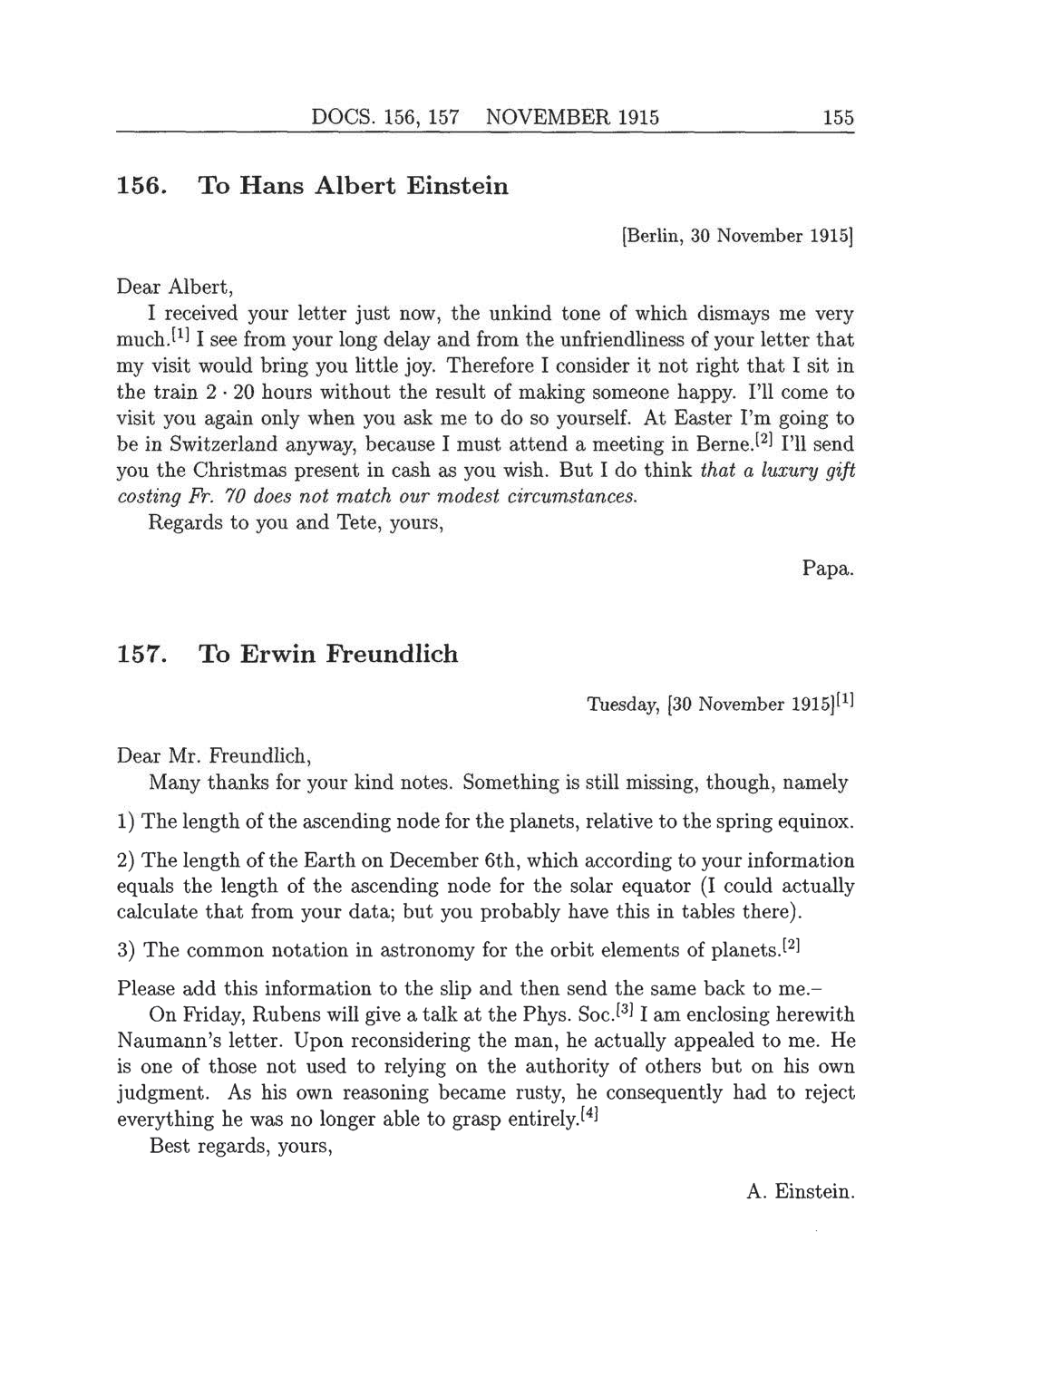 Volume 8: The Berlin Years: Correspondence, 1914-1918 (English translation supplement) page 155